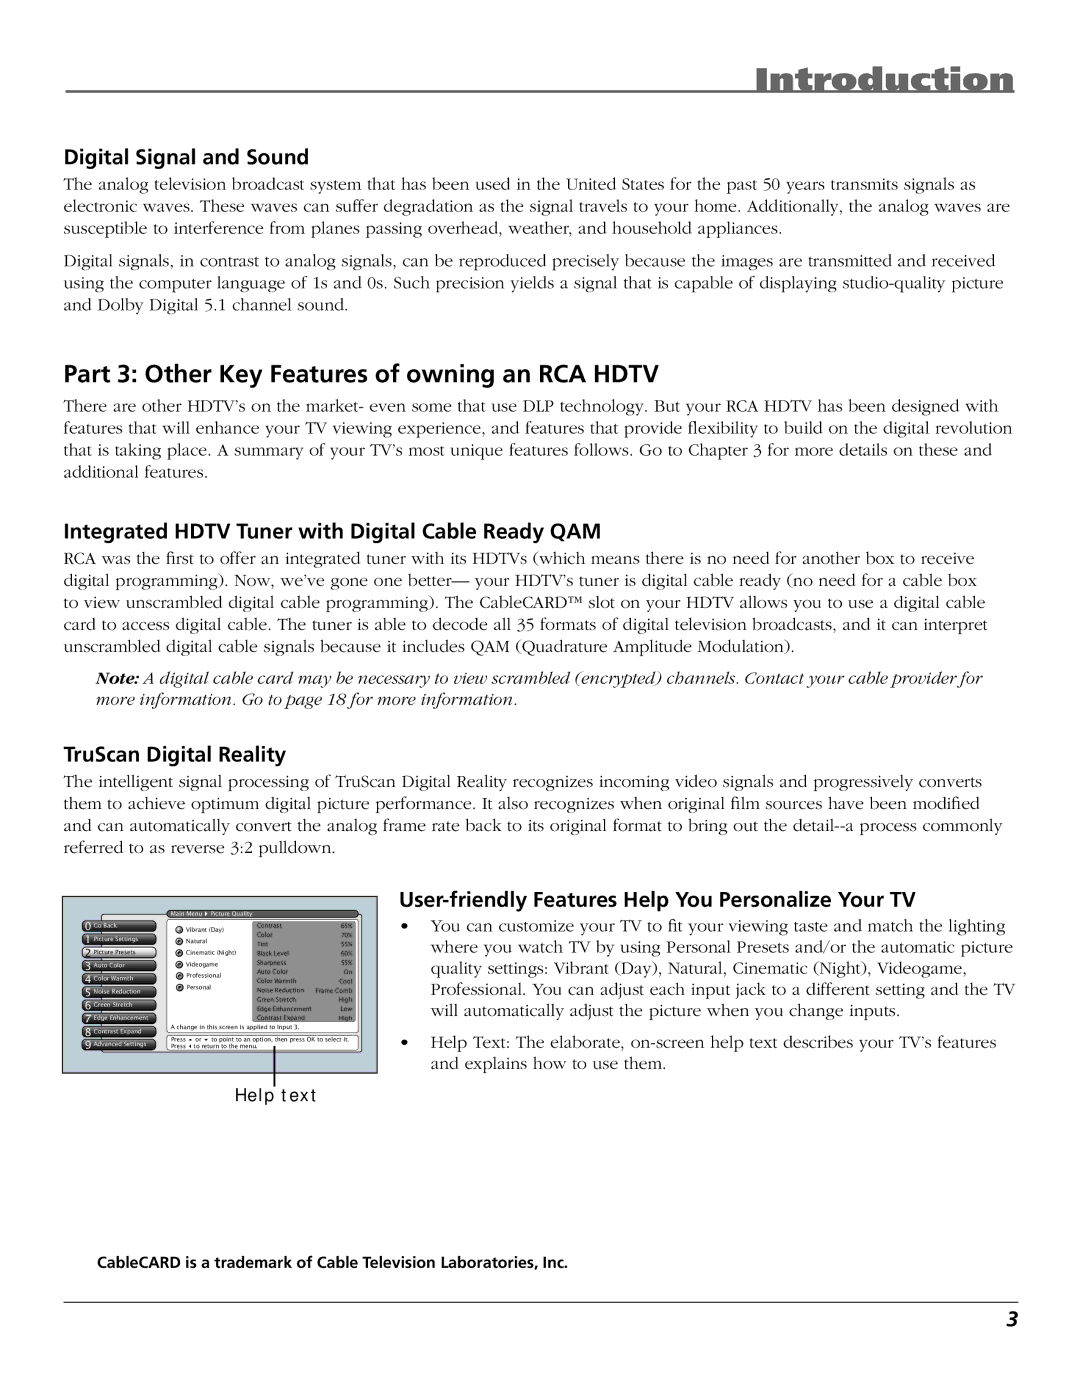 RCA HDTV manual Part 3 Other Key Features of owning an RCA Hdtv, Digital Signal and Sound, TruScan Digital Reality 